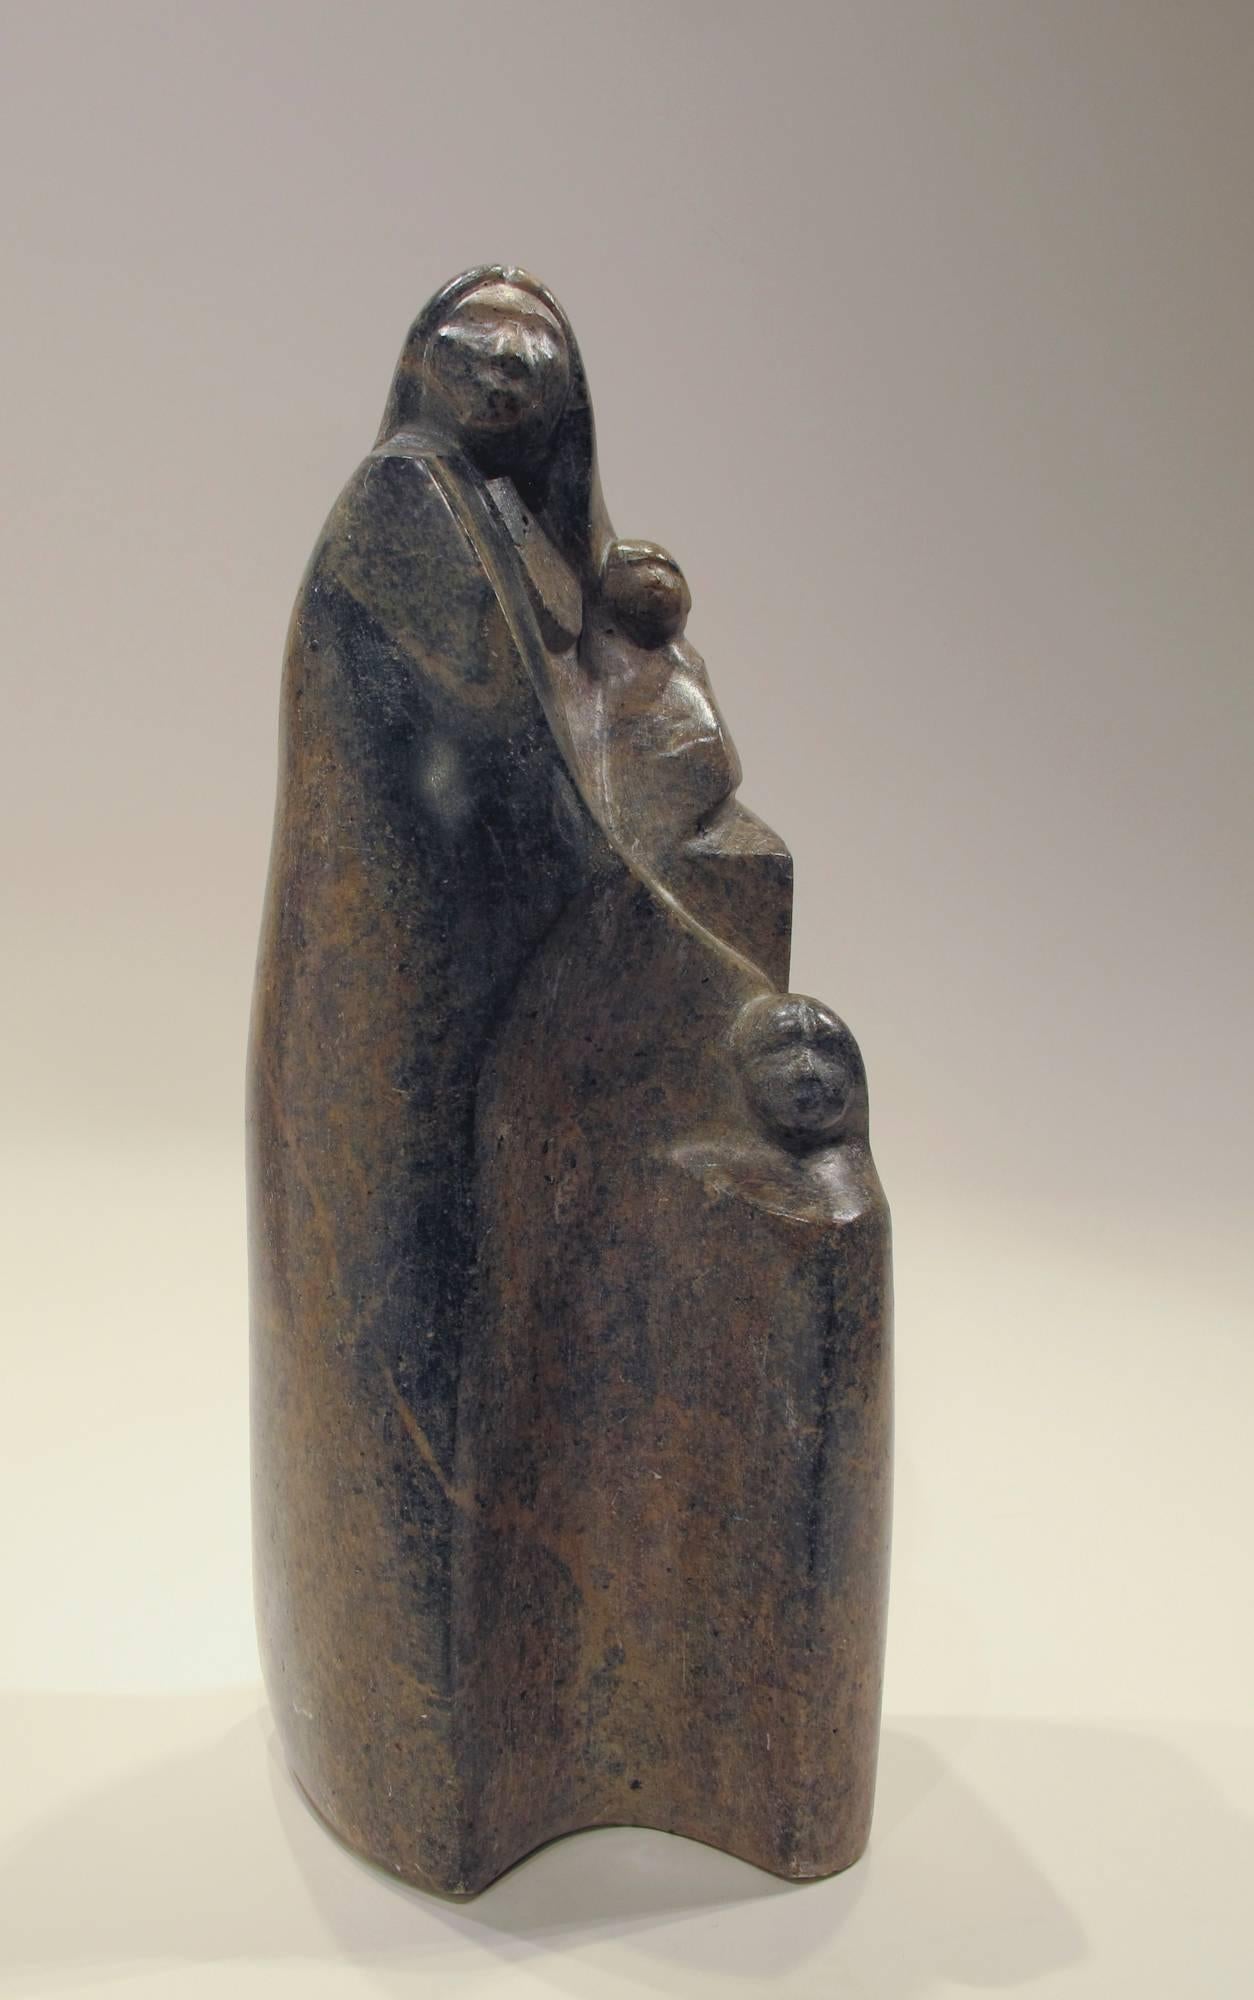 Shared Dreams, stone, sculpture, by Allan Houser, Texas steatite, mother, child
signed by the artist at the base of the child's blanket

Allan Houser (Haozous), Chiricahua Apache 1914-1994 recipient of the National Medal of Arts in 1992. Allan